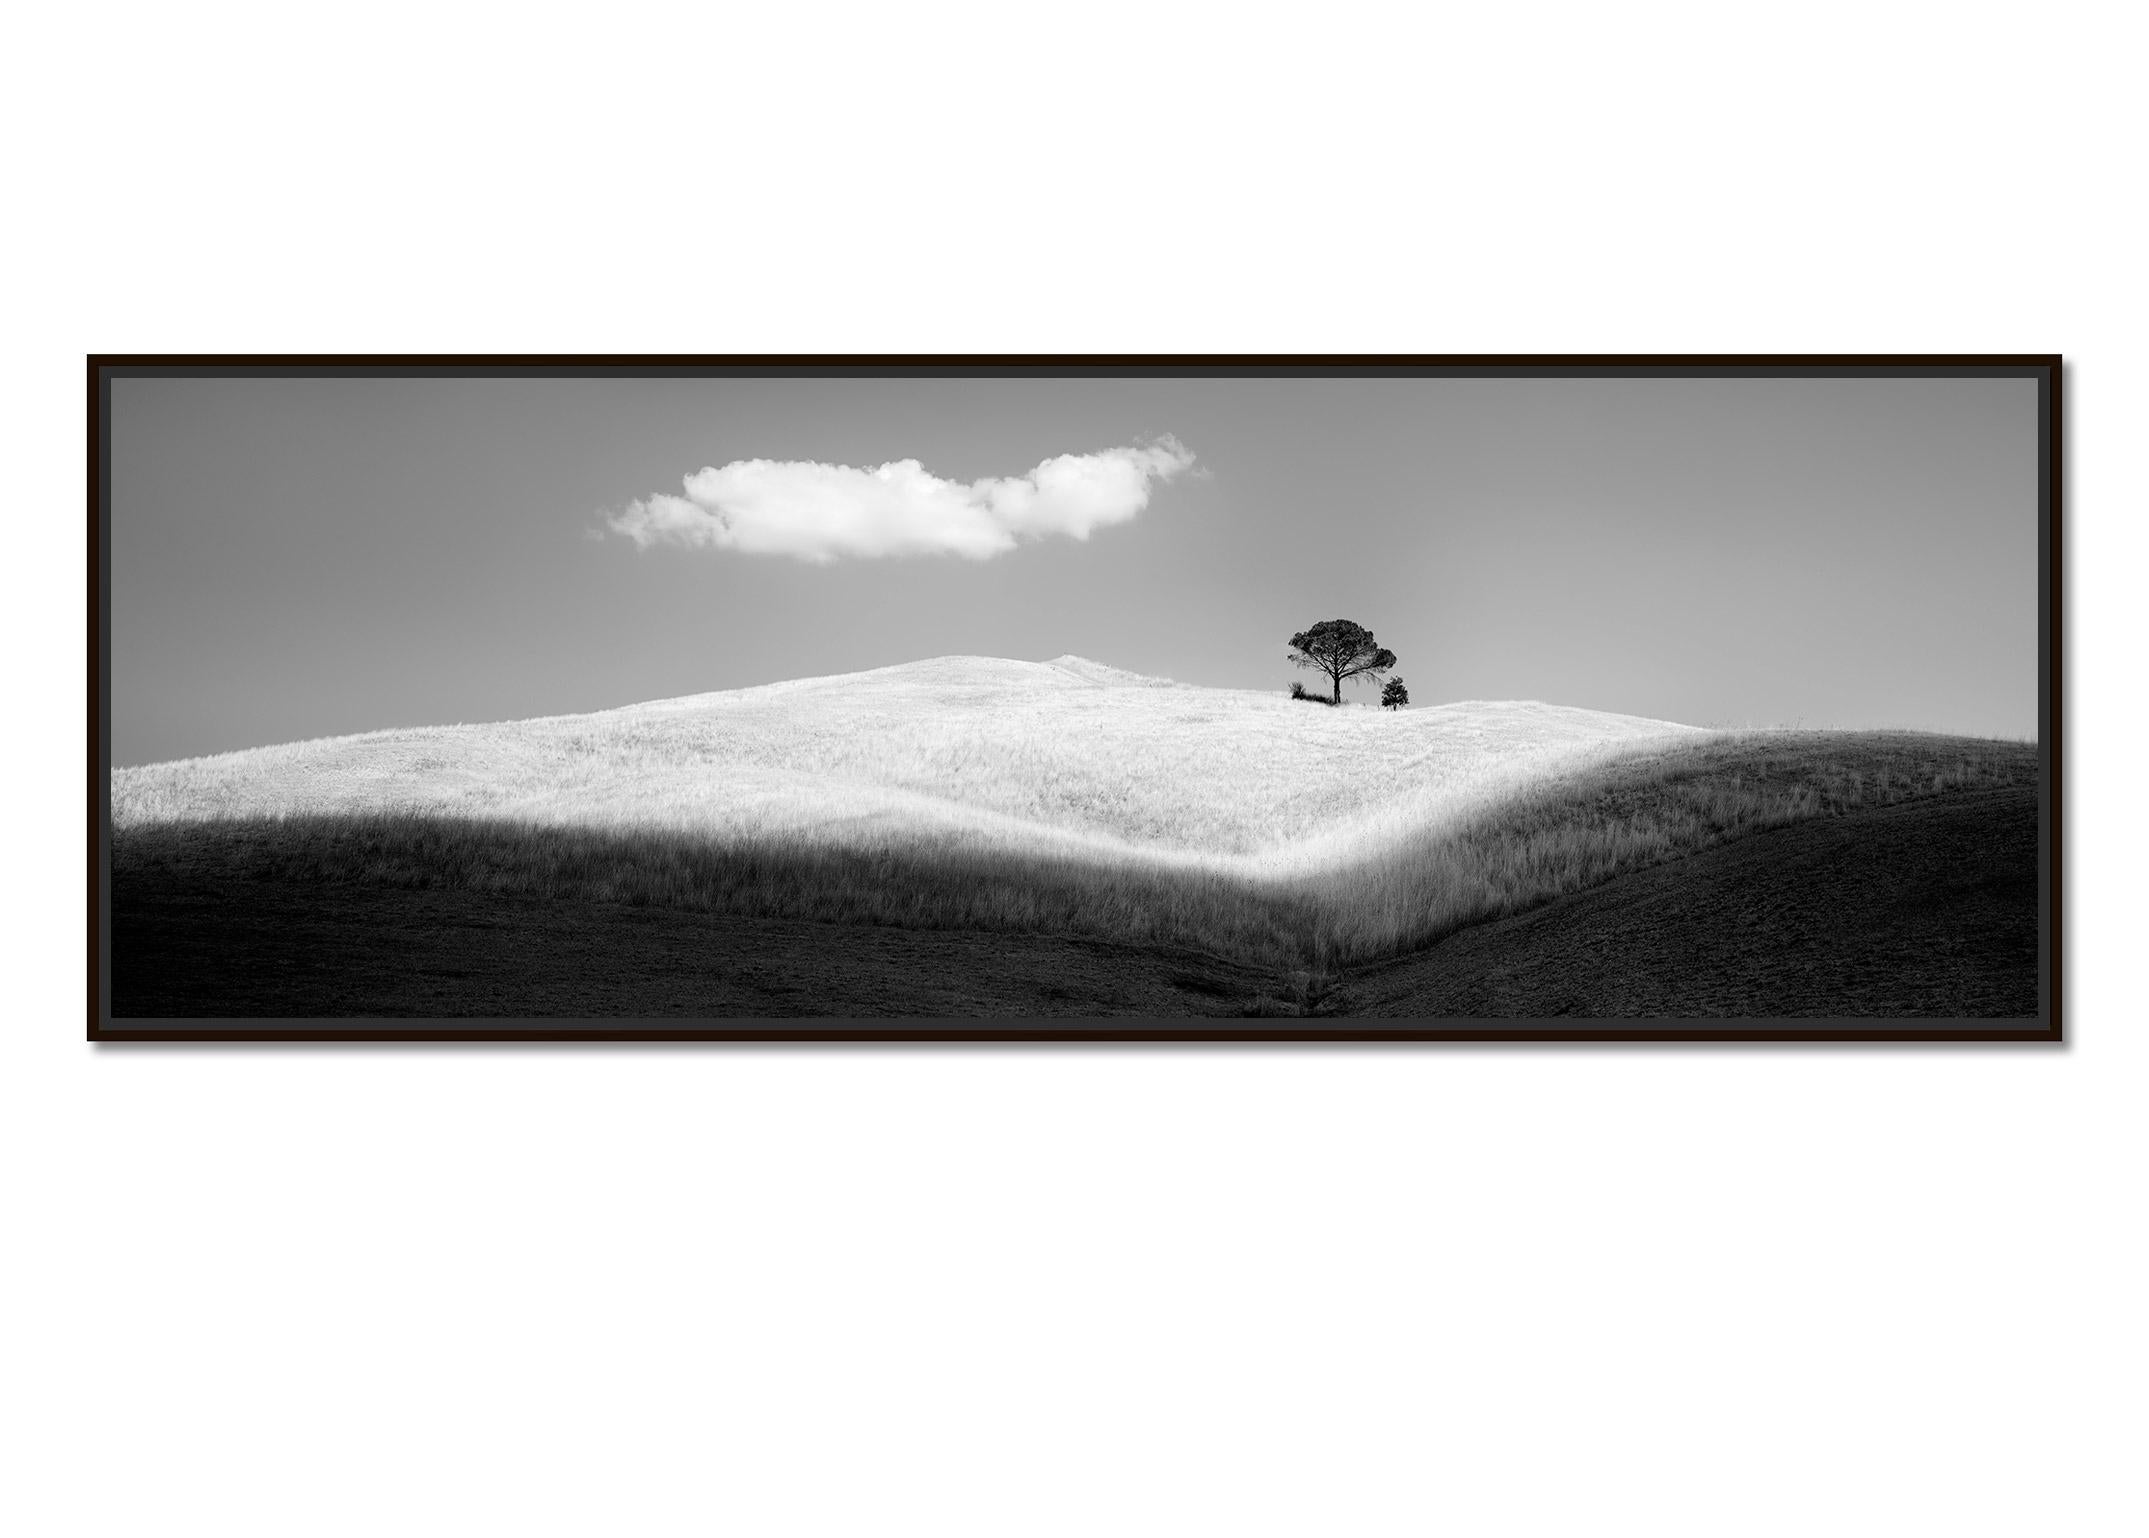 Italian Stone Pines, Panorama, Italy, black and white art photography, landscape - Photograph by Gerald Berghammer